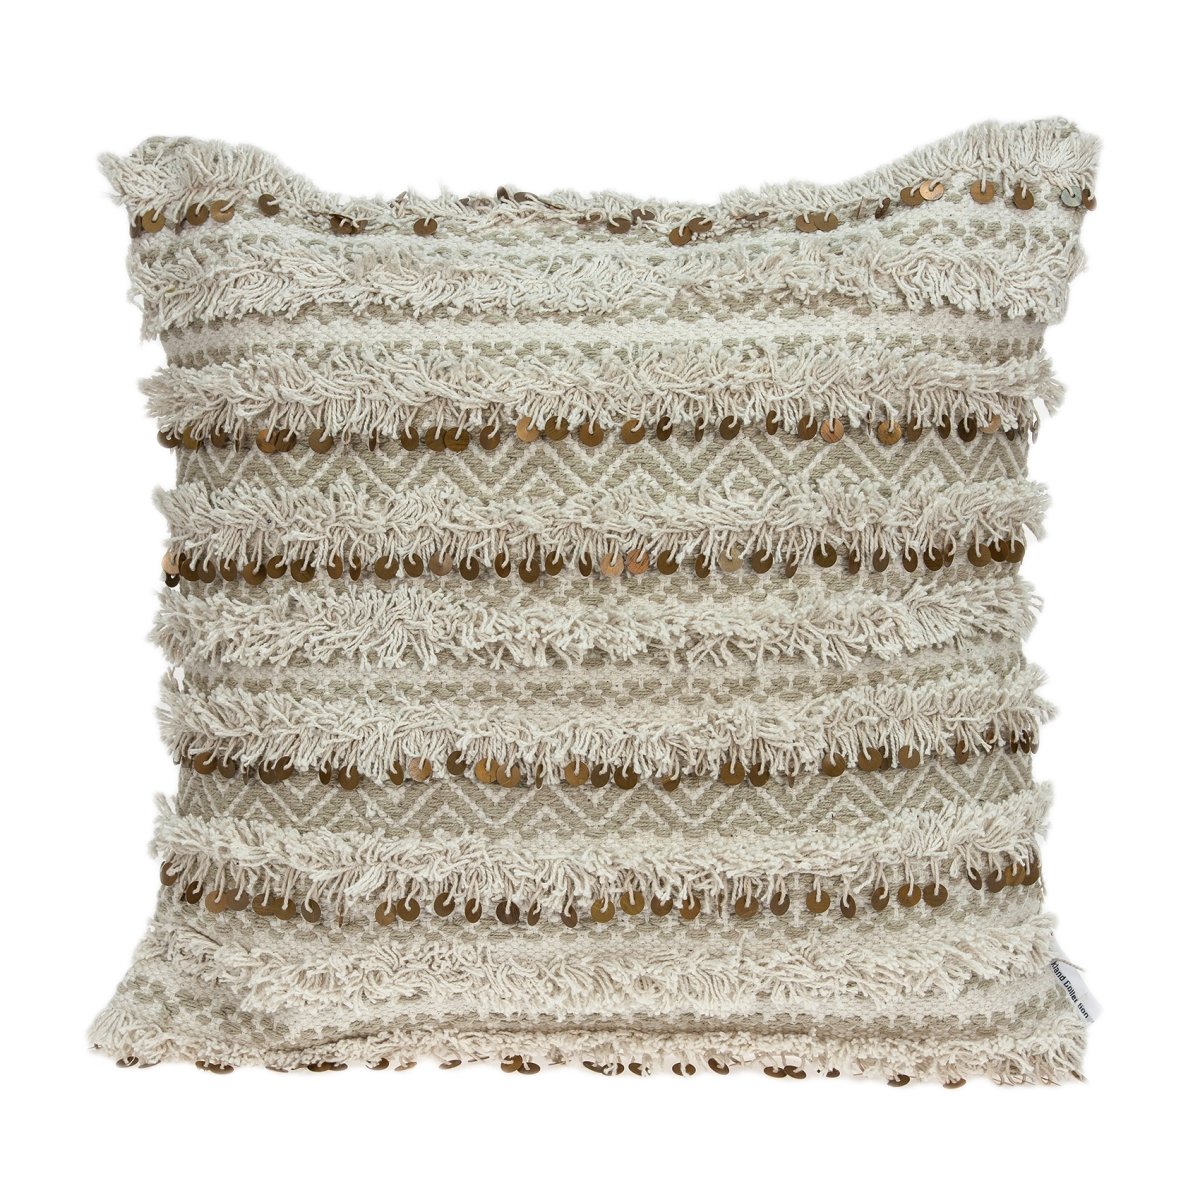 Pild11128d Hailey Beige & Tan Square Bohemian Pillow Cover With Down Insert - 20 X 20 X 7 In.